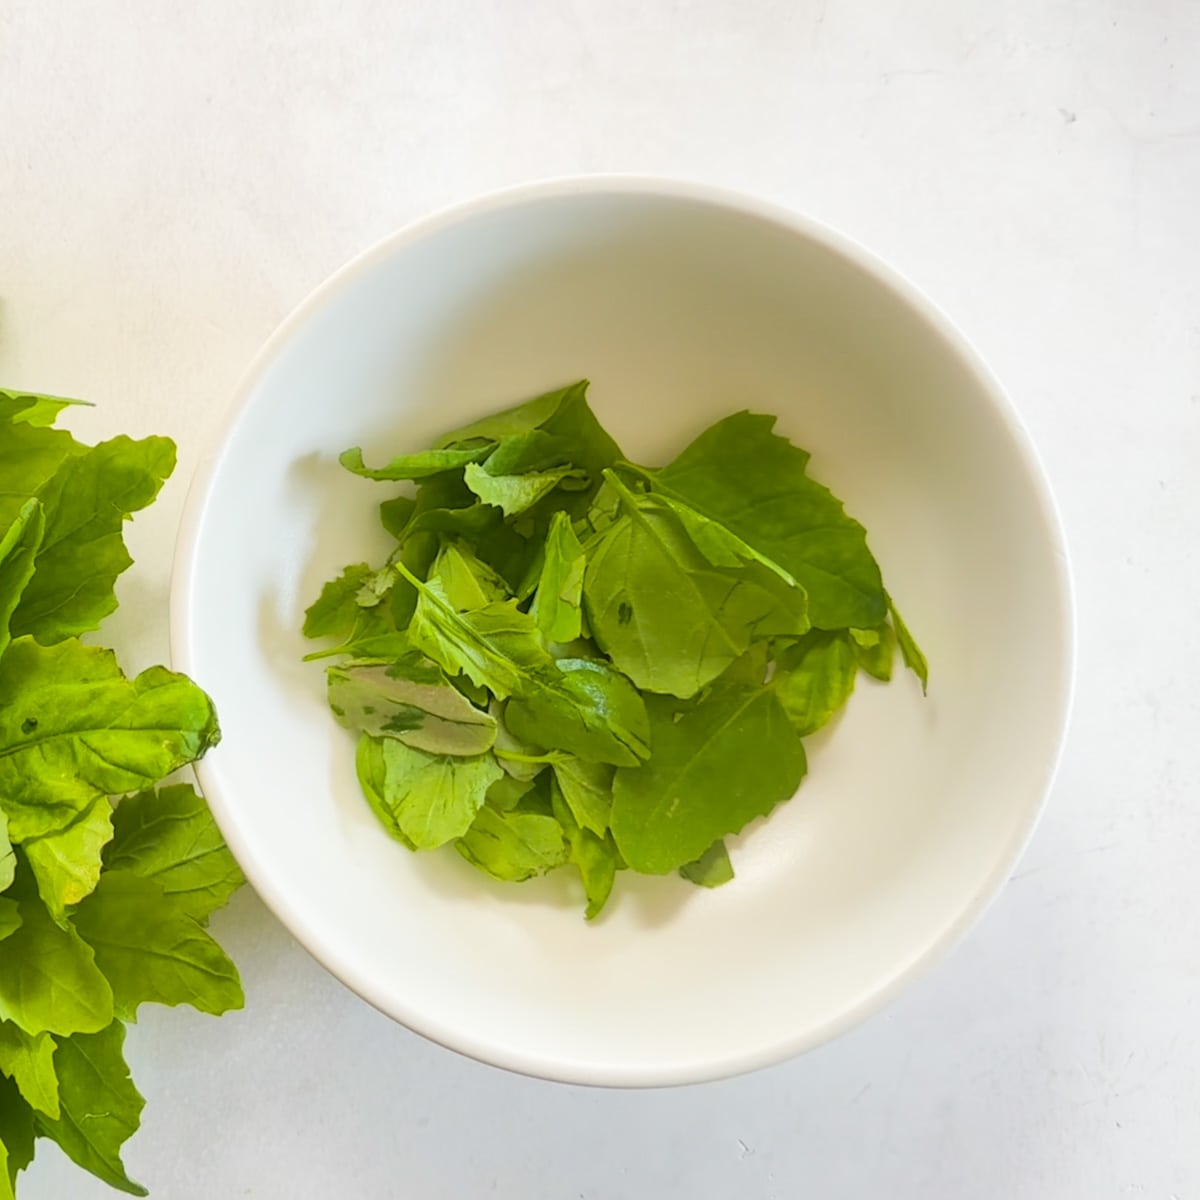 Bathua leaves plucked and put in a white bowl. 